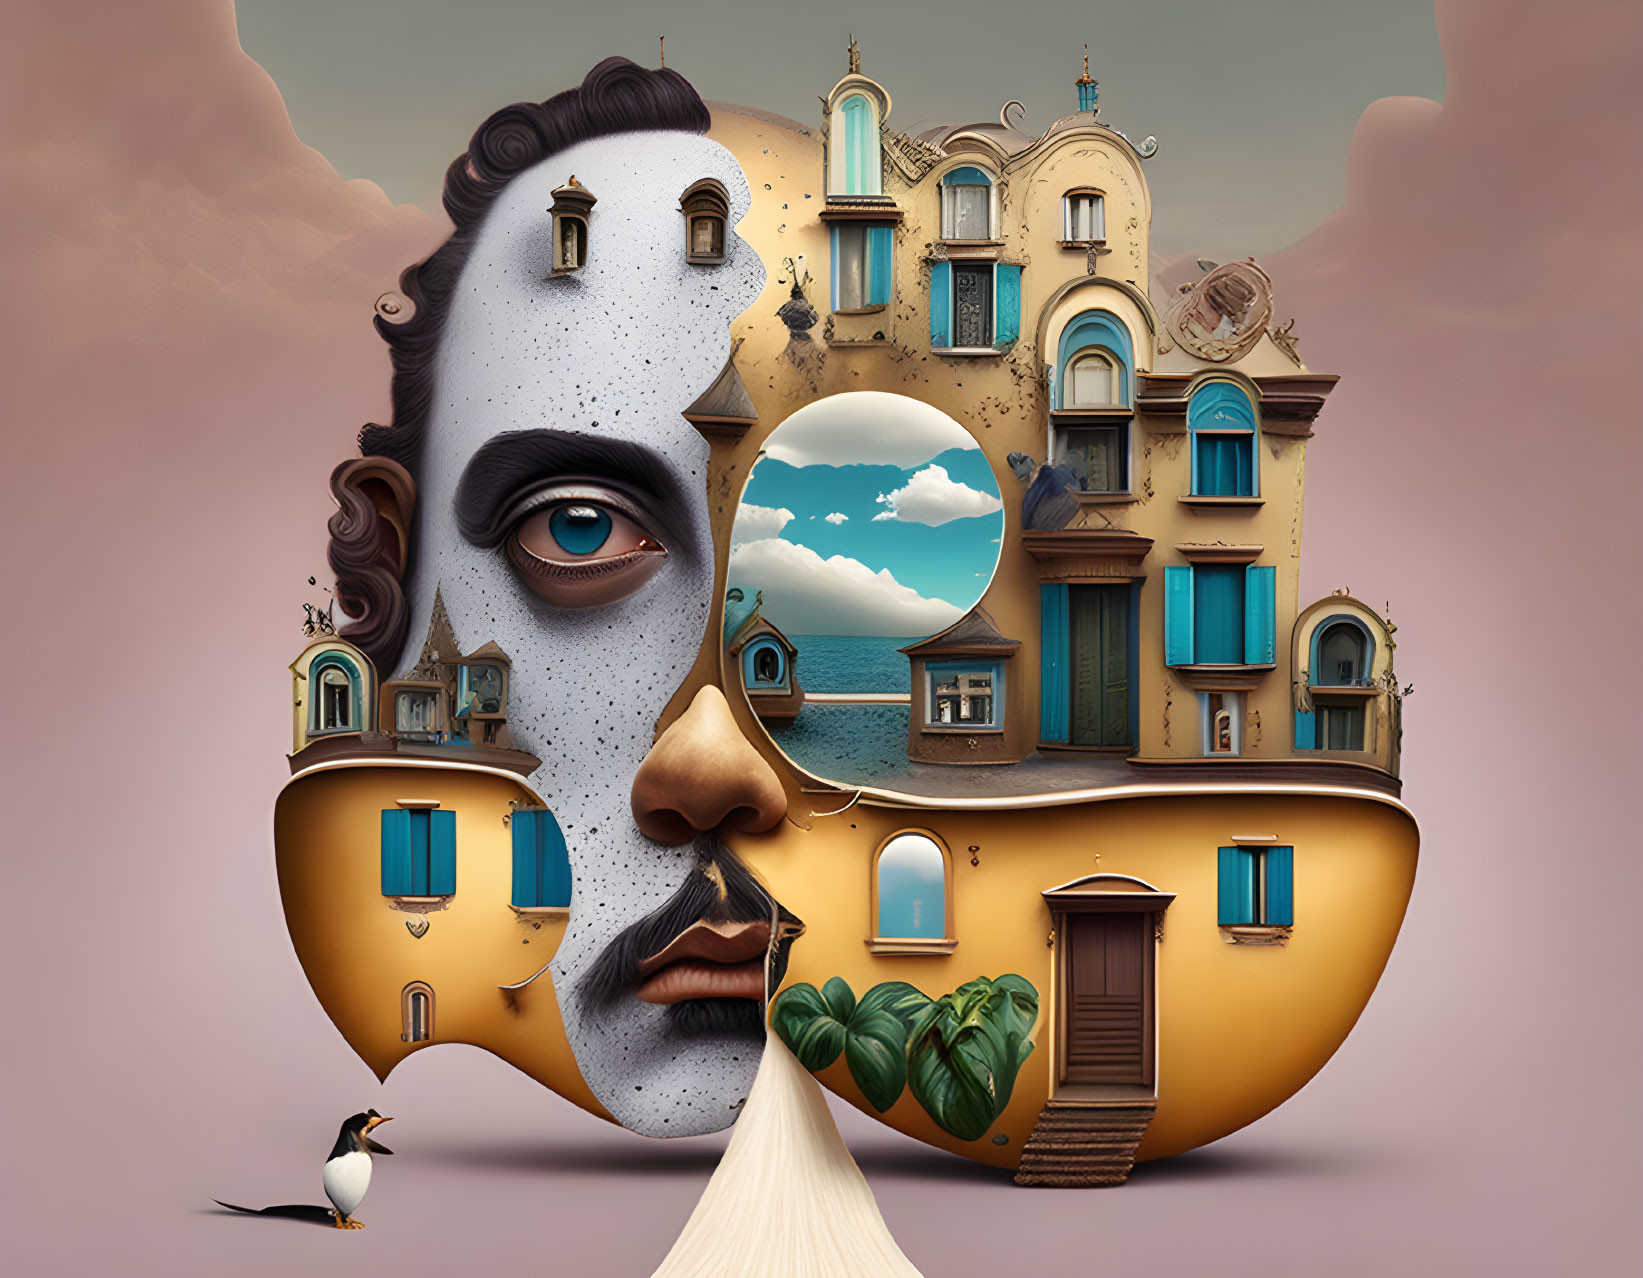 Surrealist artwork: Human face merges with architectural elements